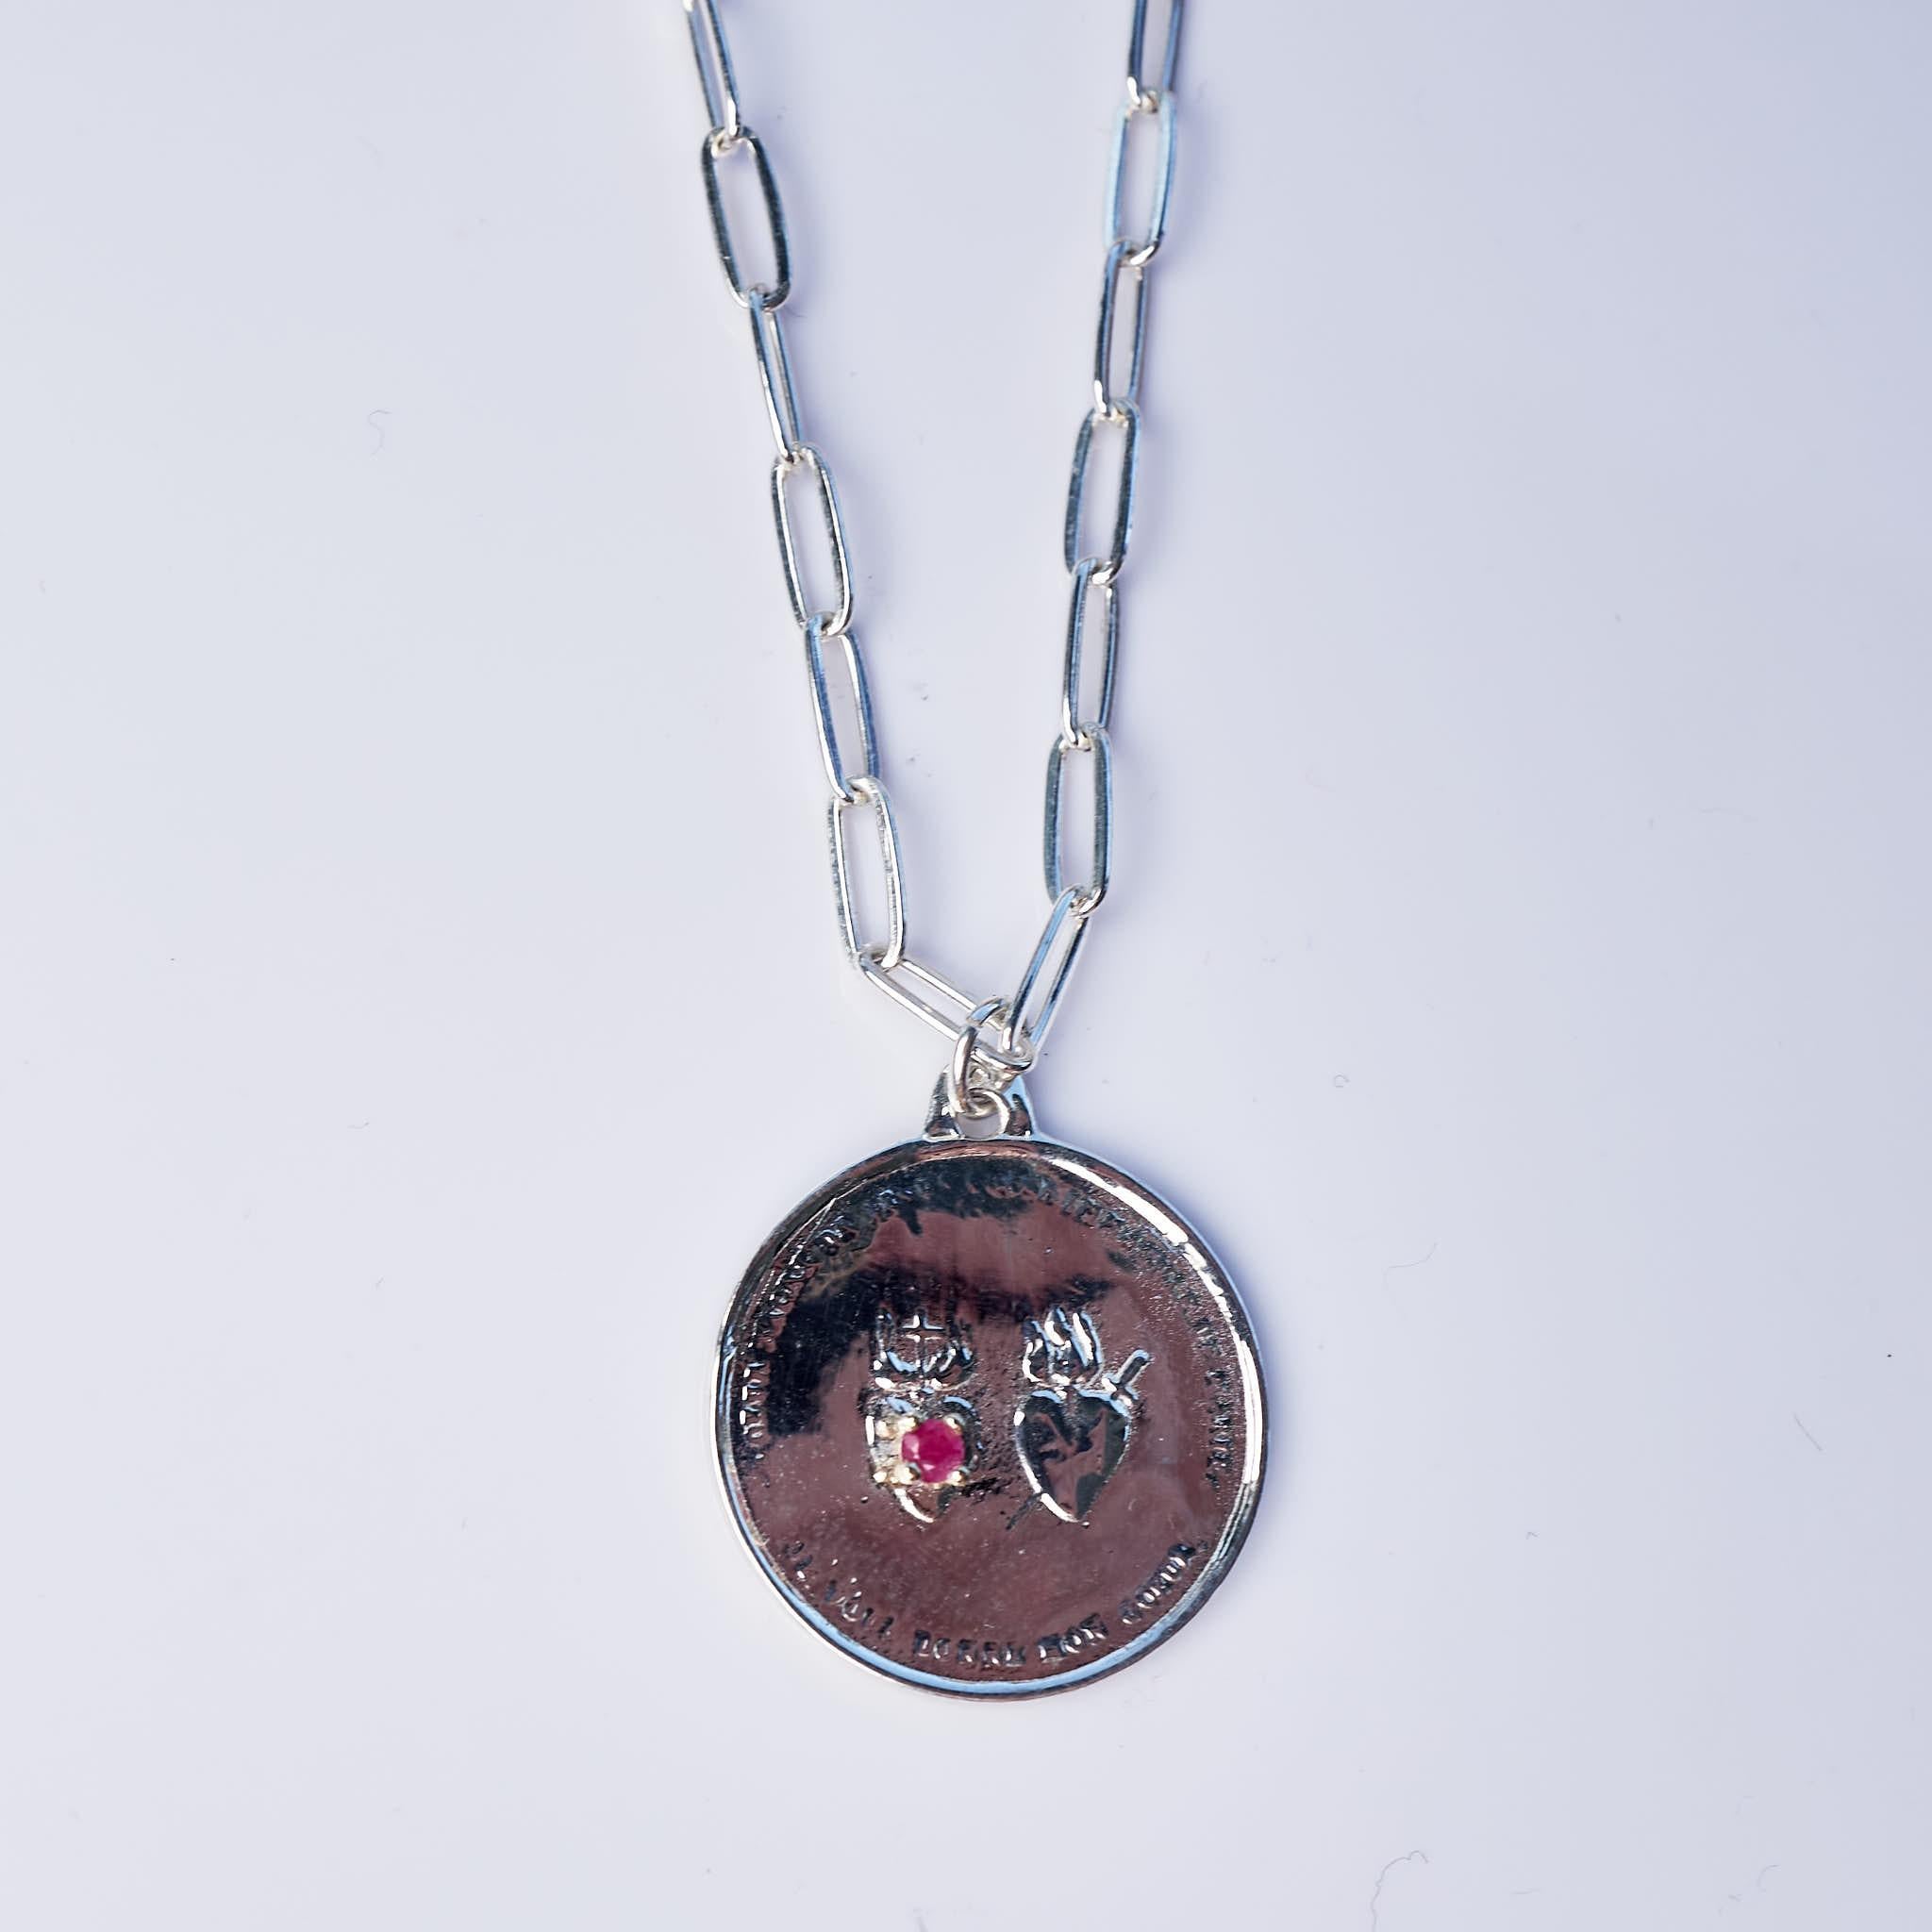 1 pcs Ruby Sacred Twin Heart Silver Medal Necklace on a Silver Chain J Dauphin. Chain can be used full length or shorter. 
Perfect Valentines gift.

Symbols or medals can become a powerful tool in our arsenal for the spiritual. 
Since ancient times